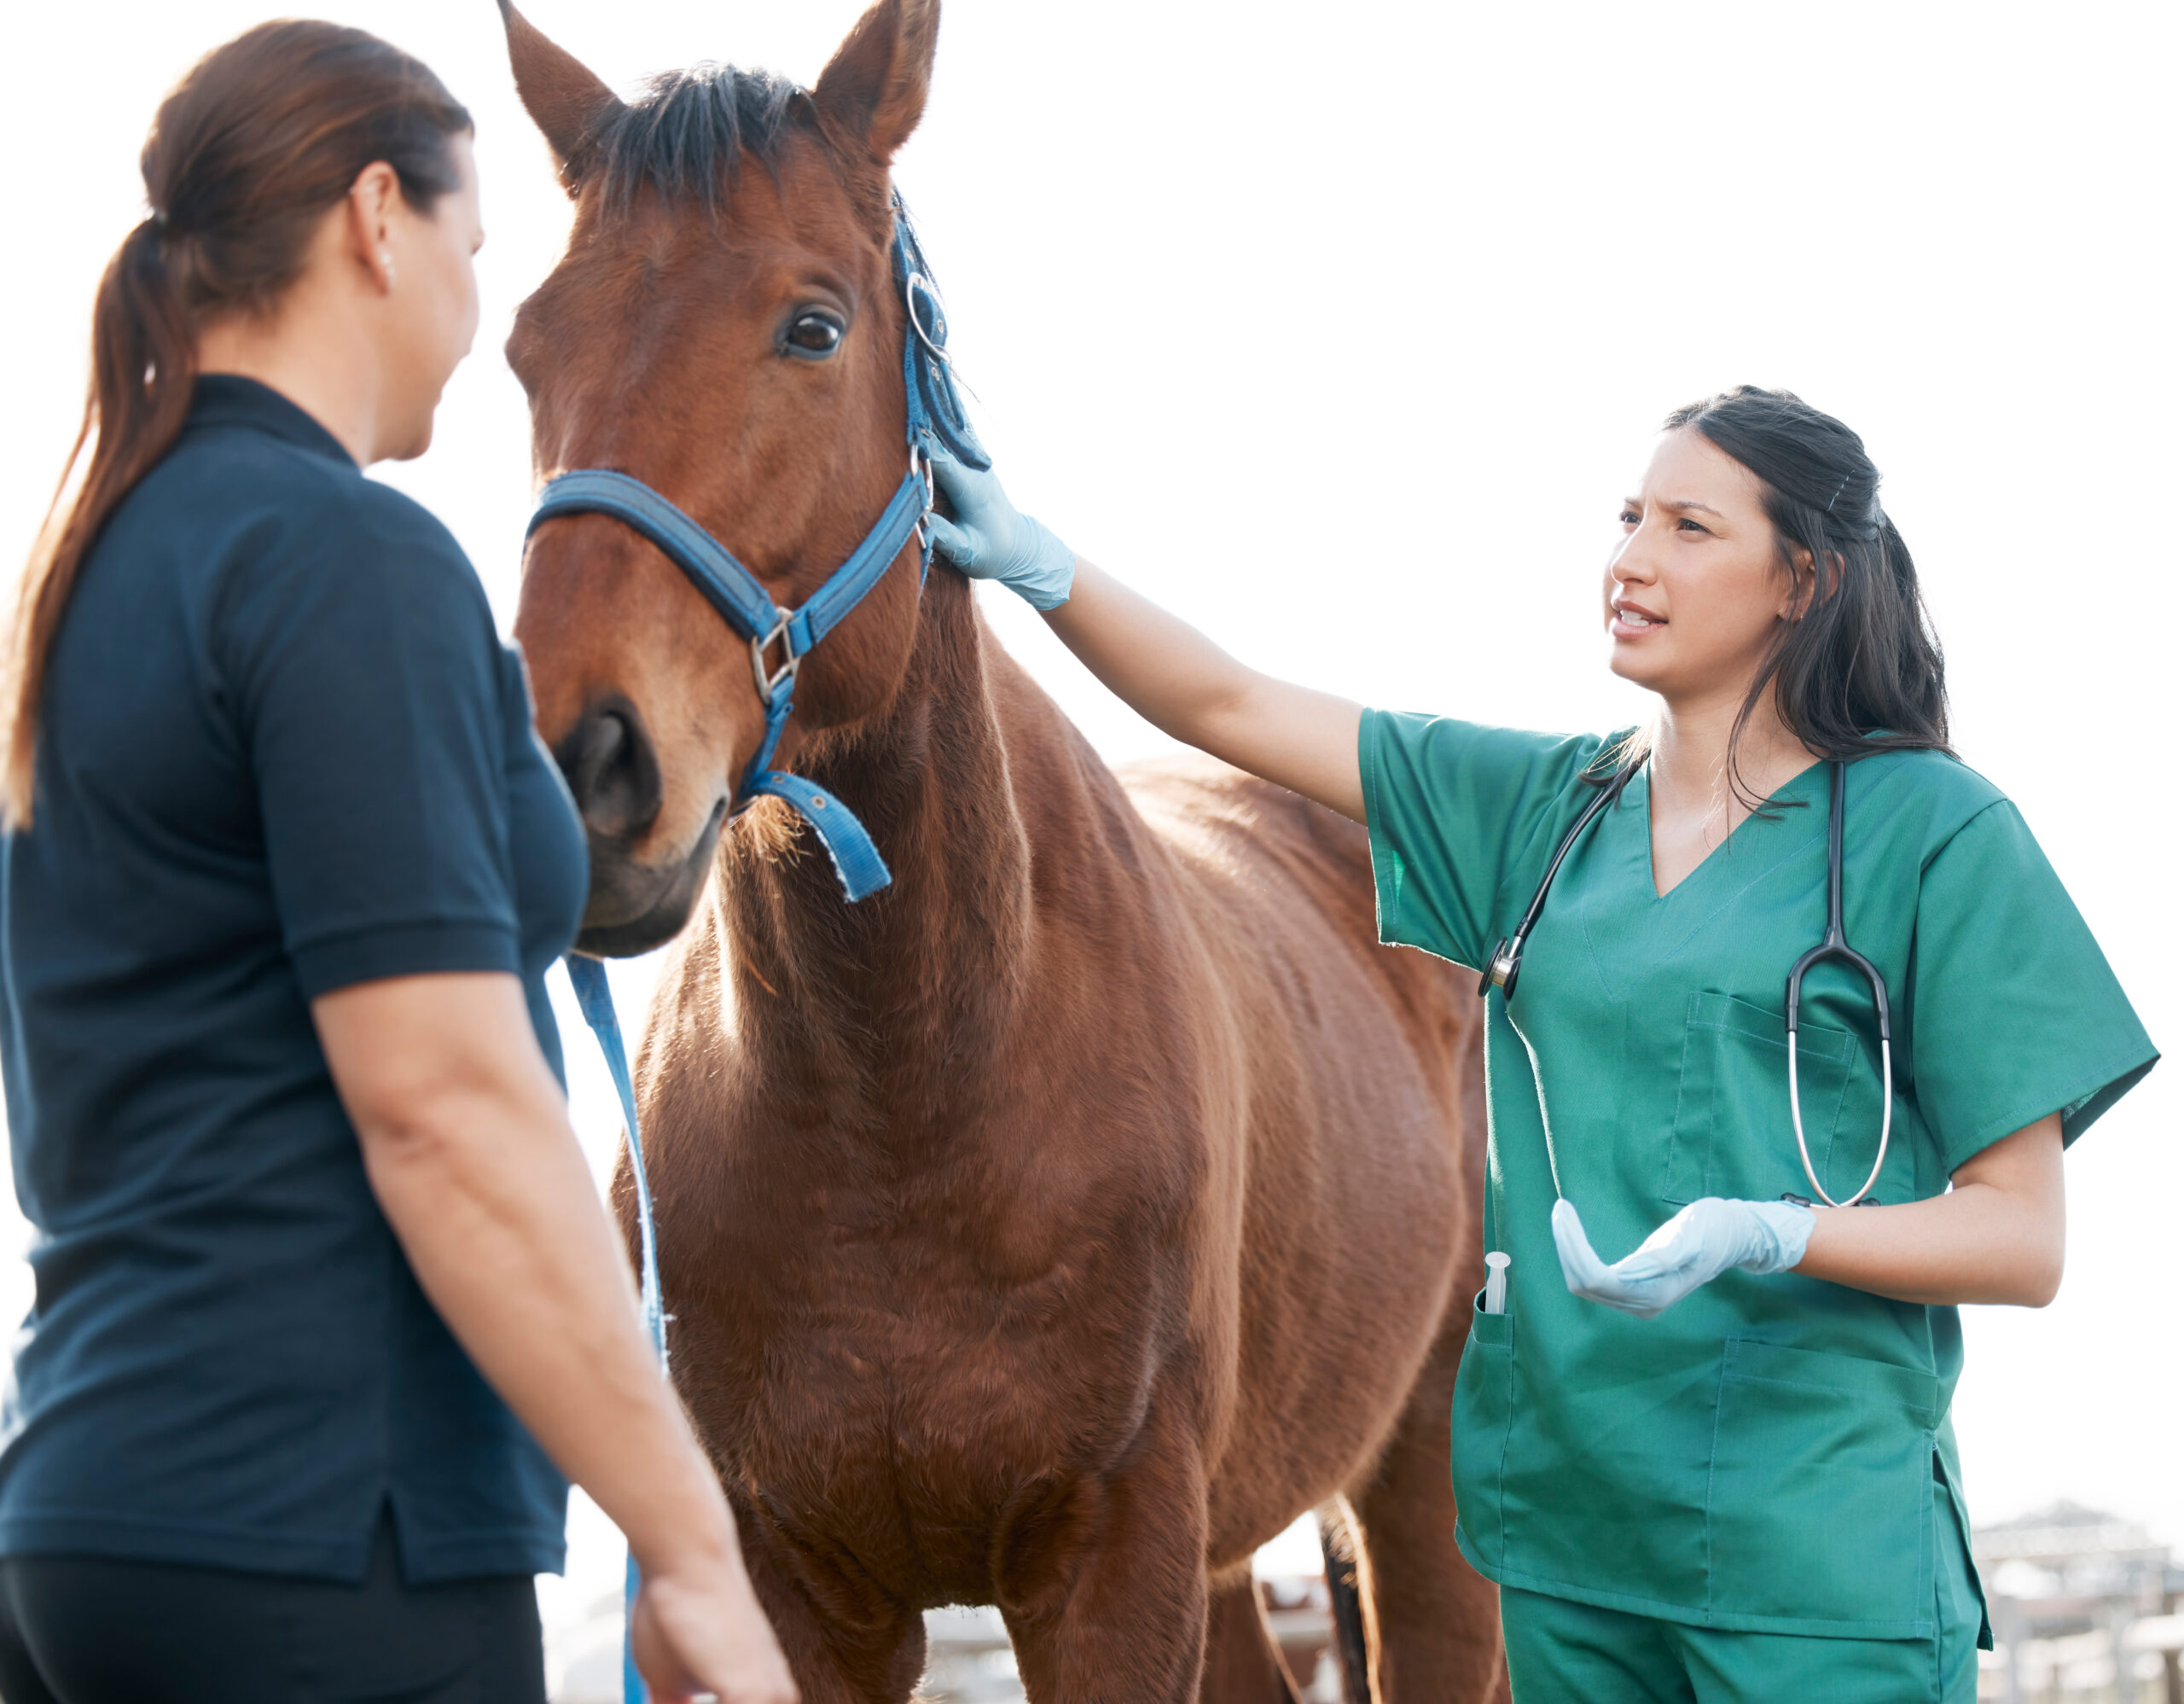 5 things to do when your horse’s leg is swollen